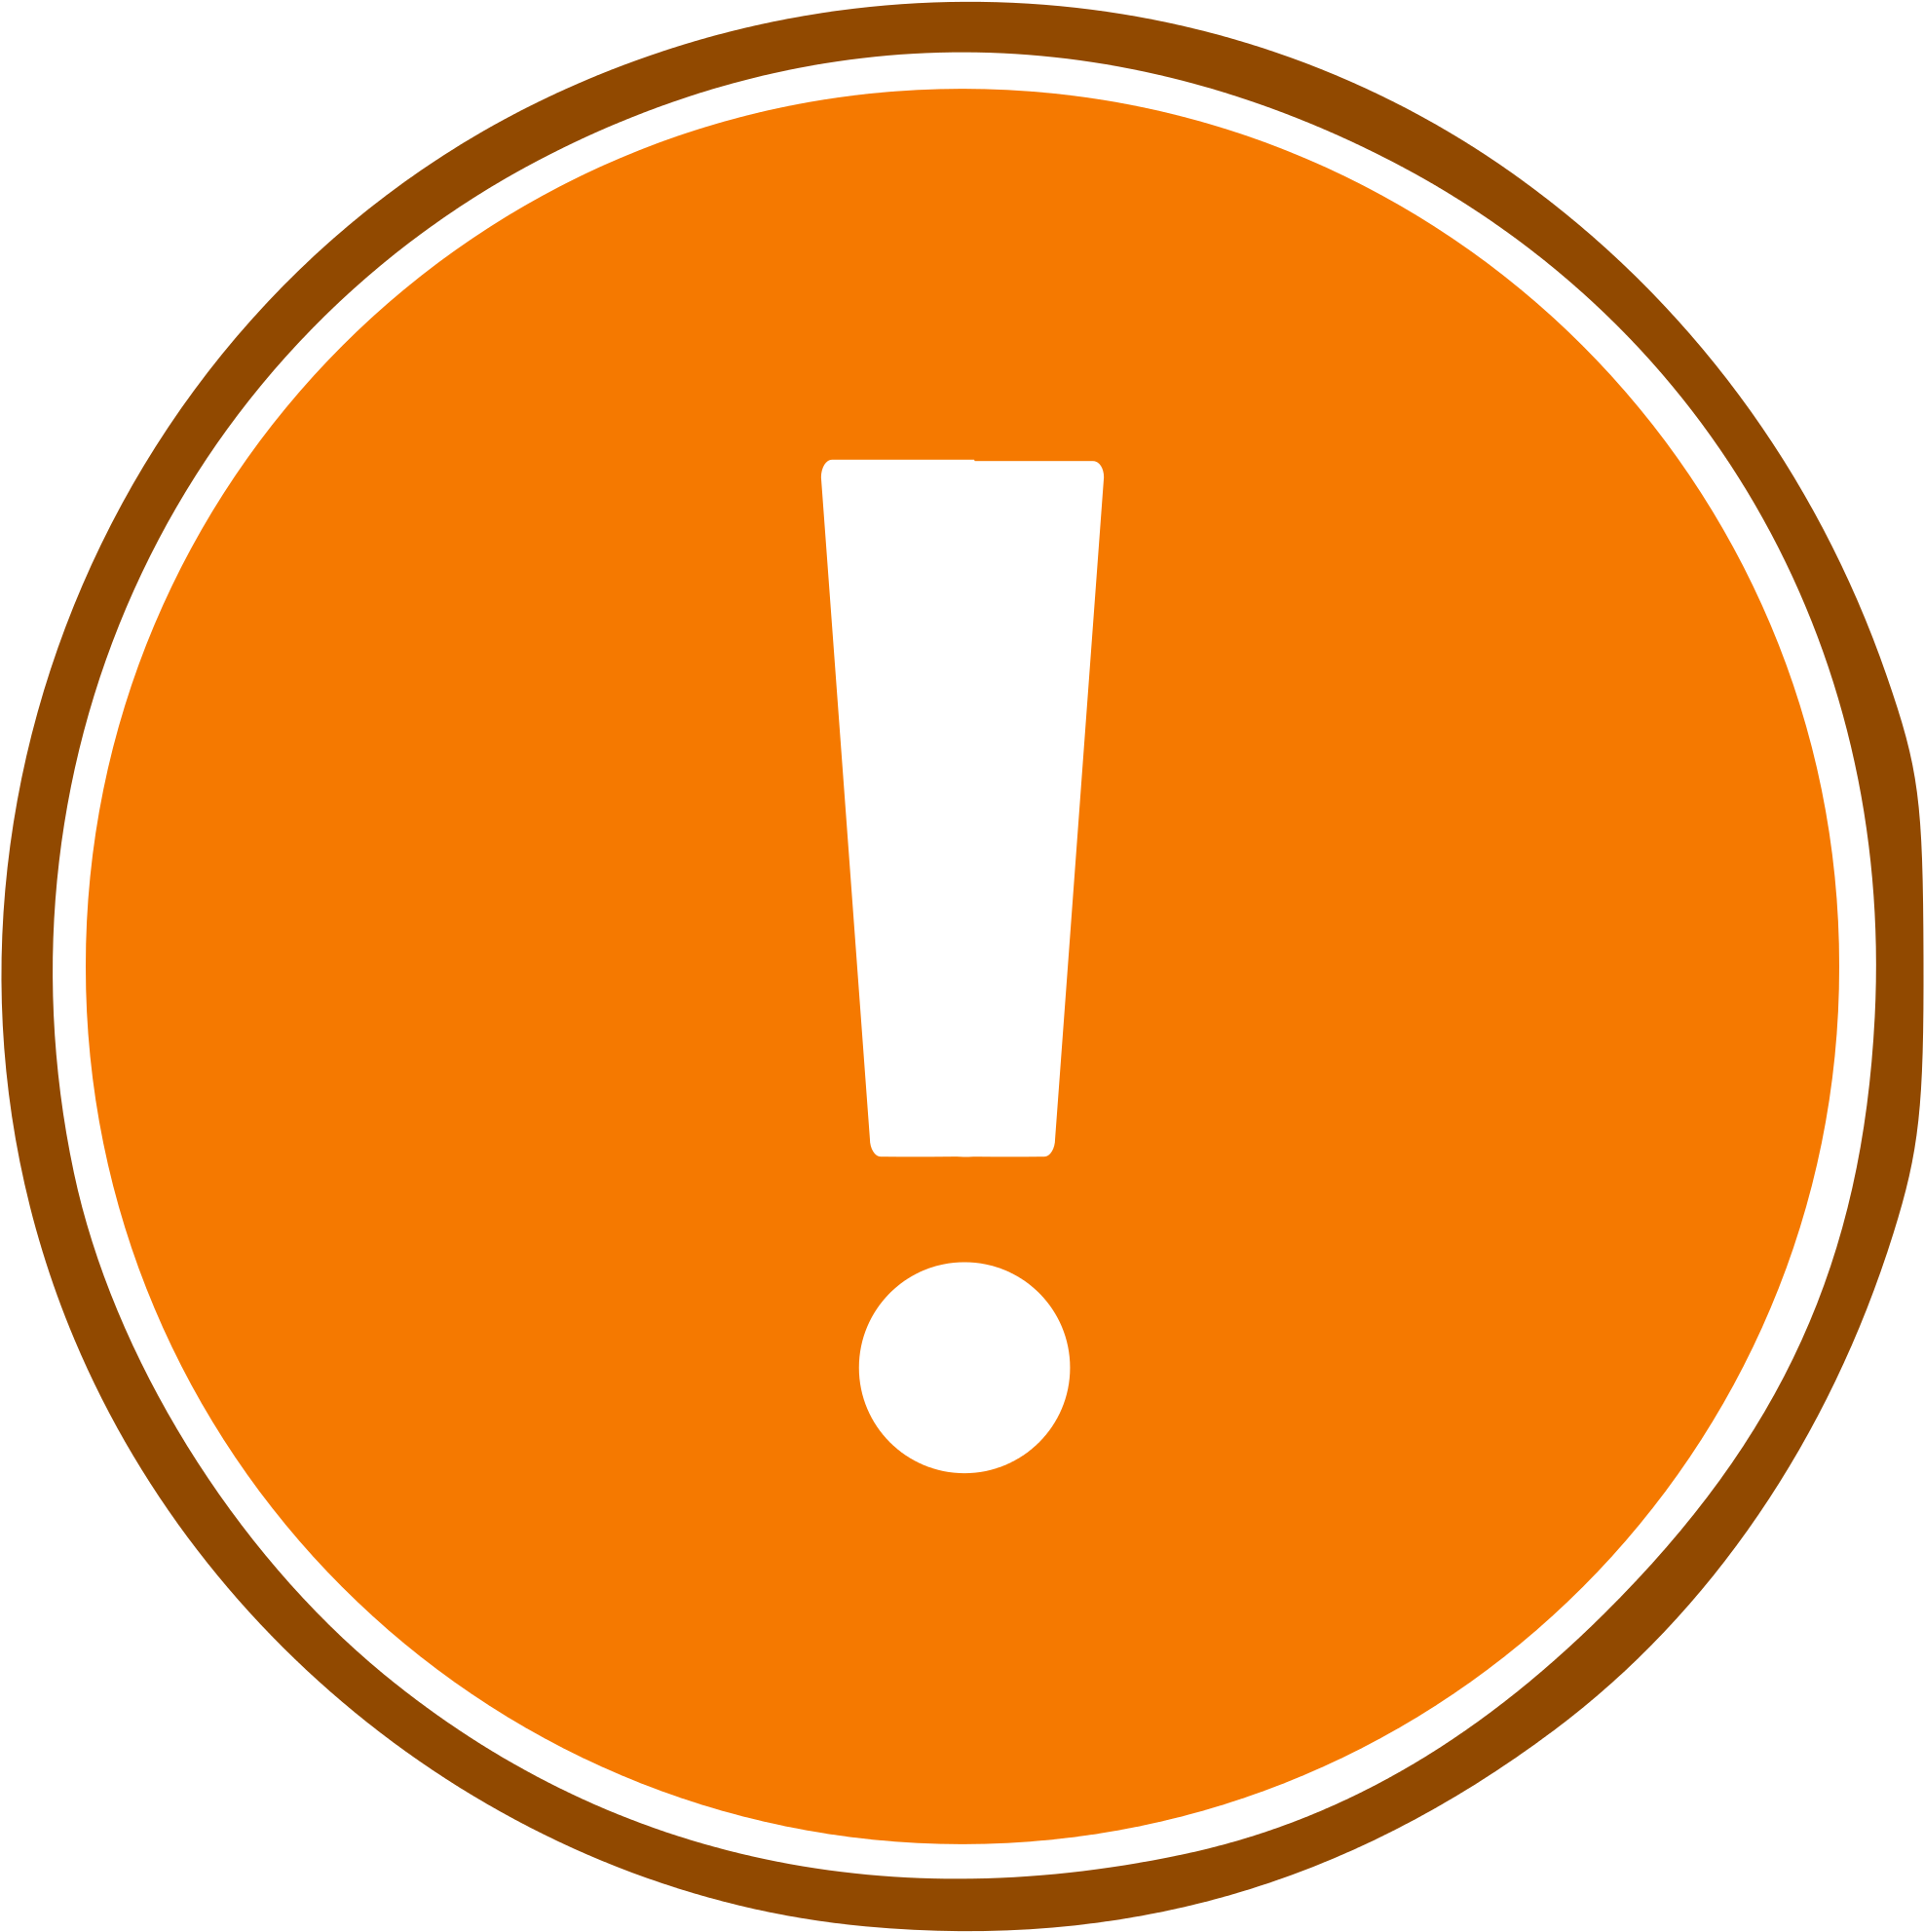 Attention Symbol PNG Image